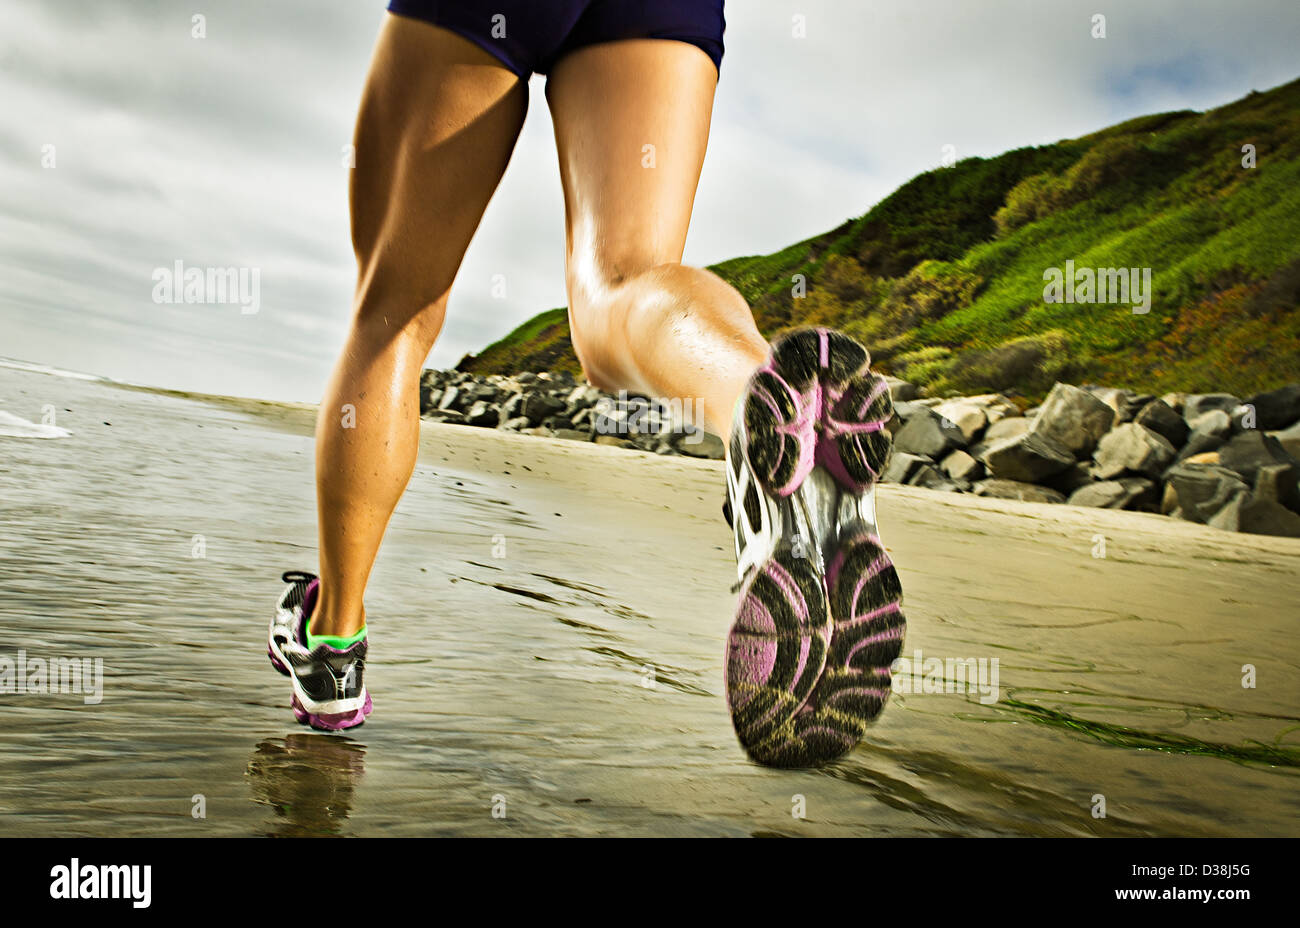 Close up of woman running on beach Banque D'Images